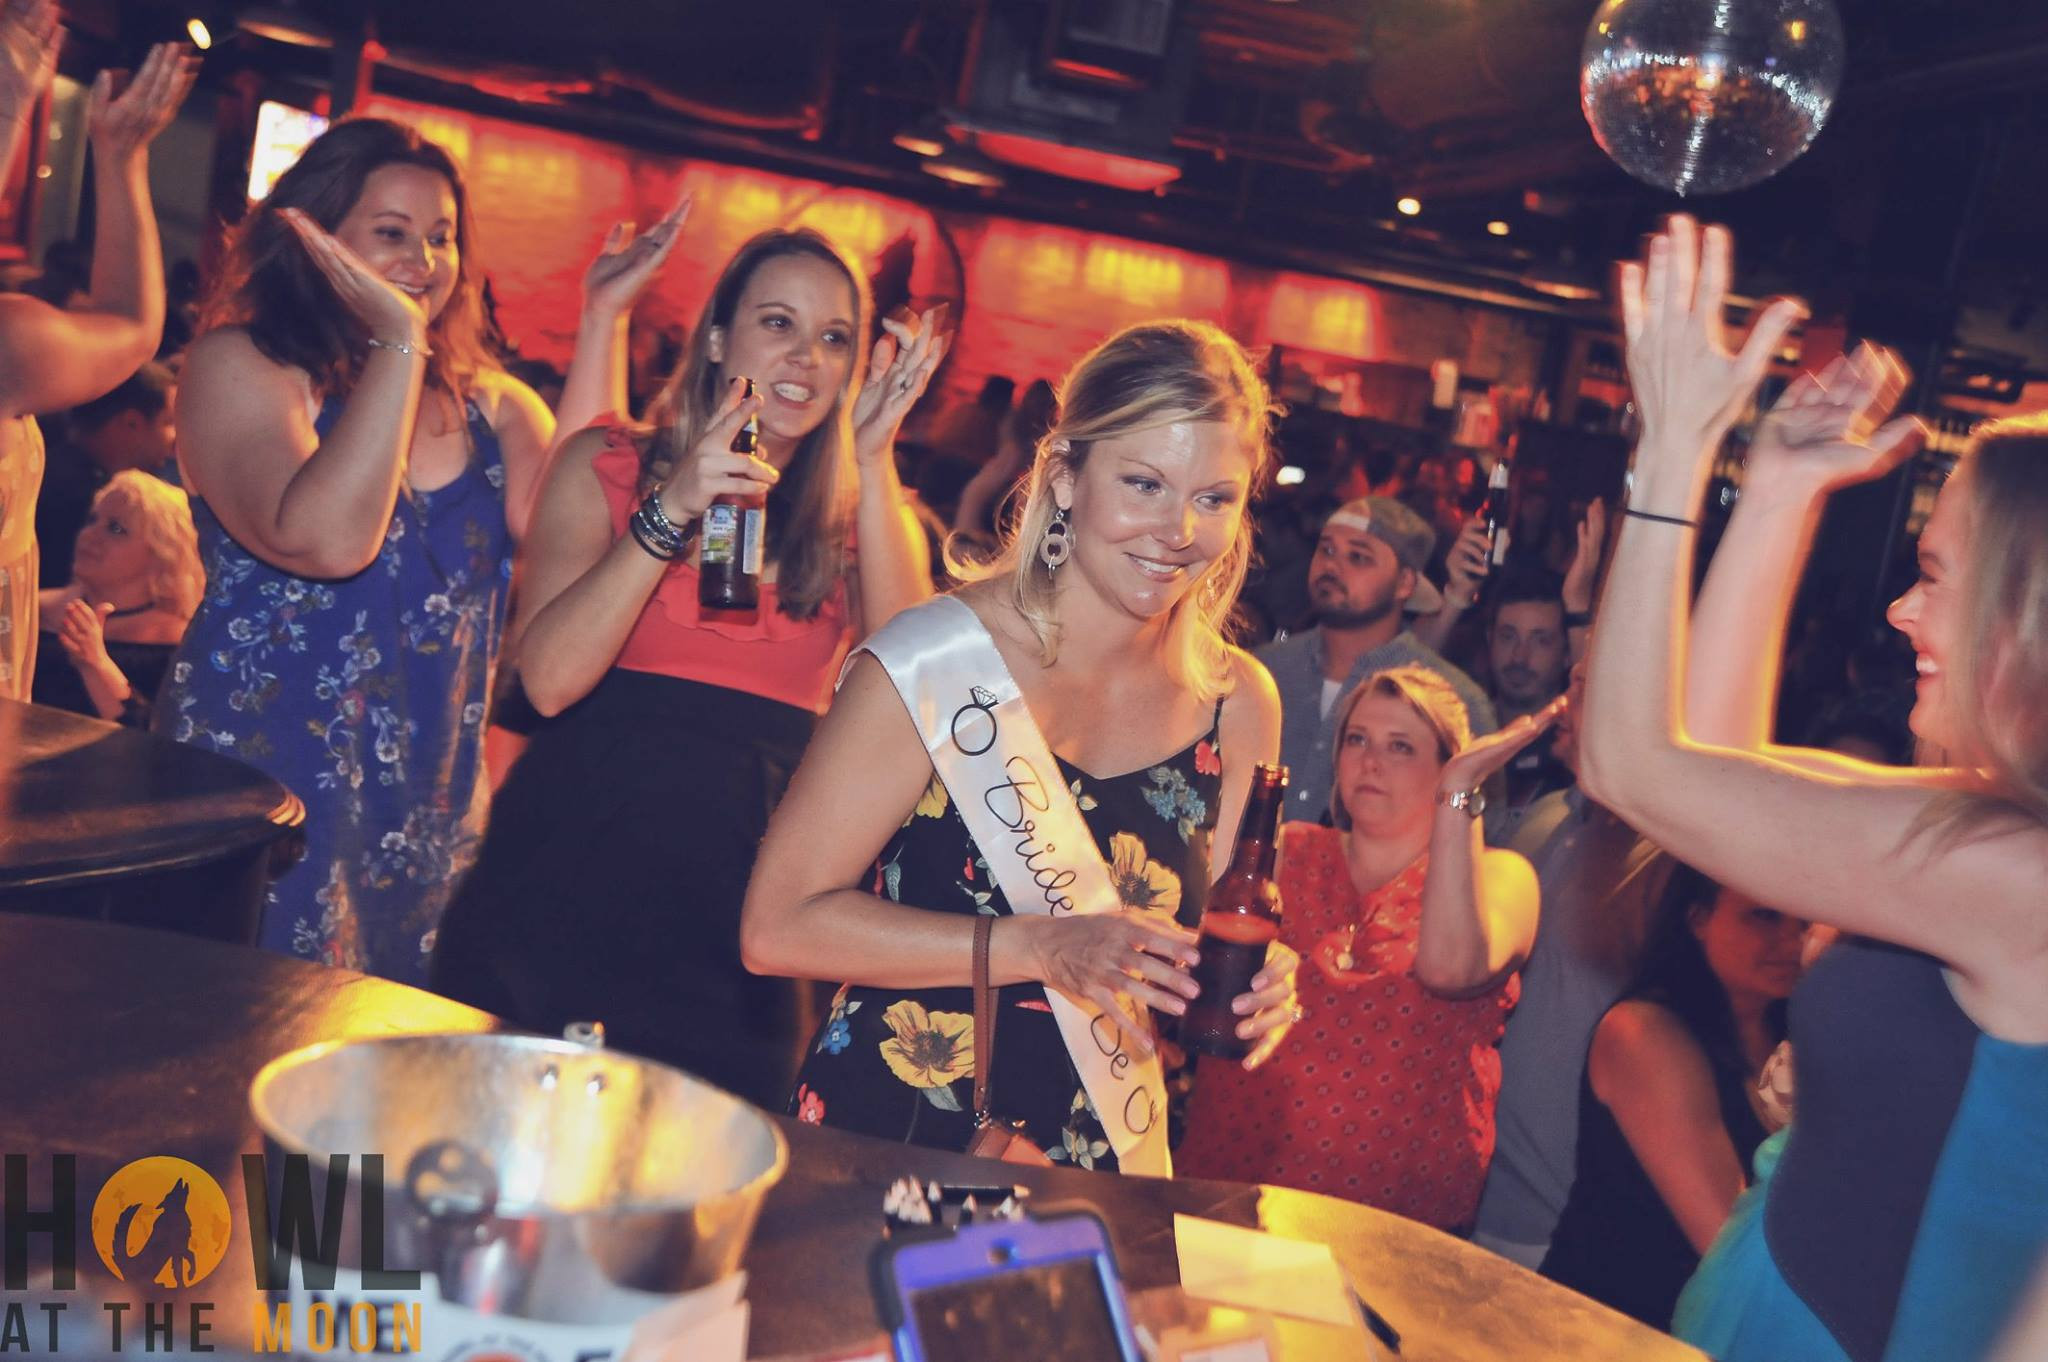 Bachelorette Party Ideas Houston Tx
 Beginners Guide to Planning a Bachelorette Party